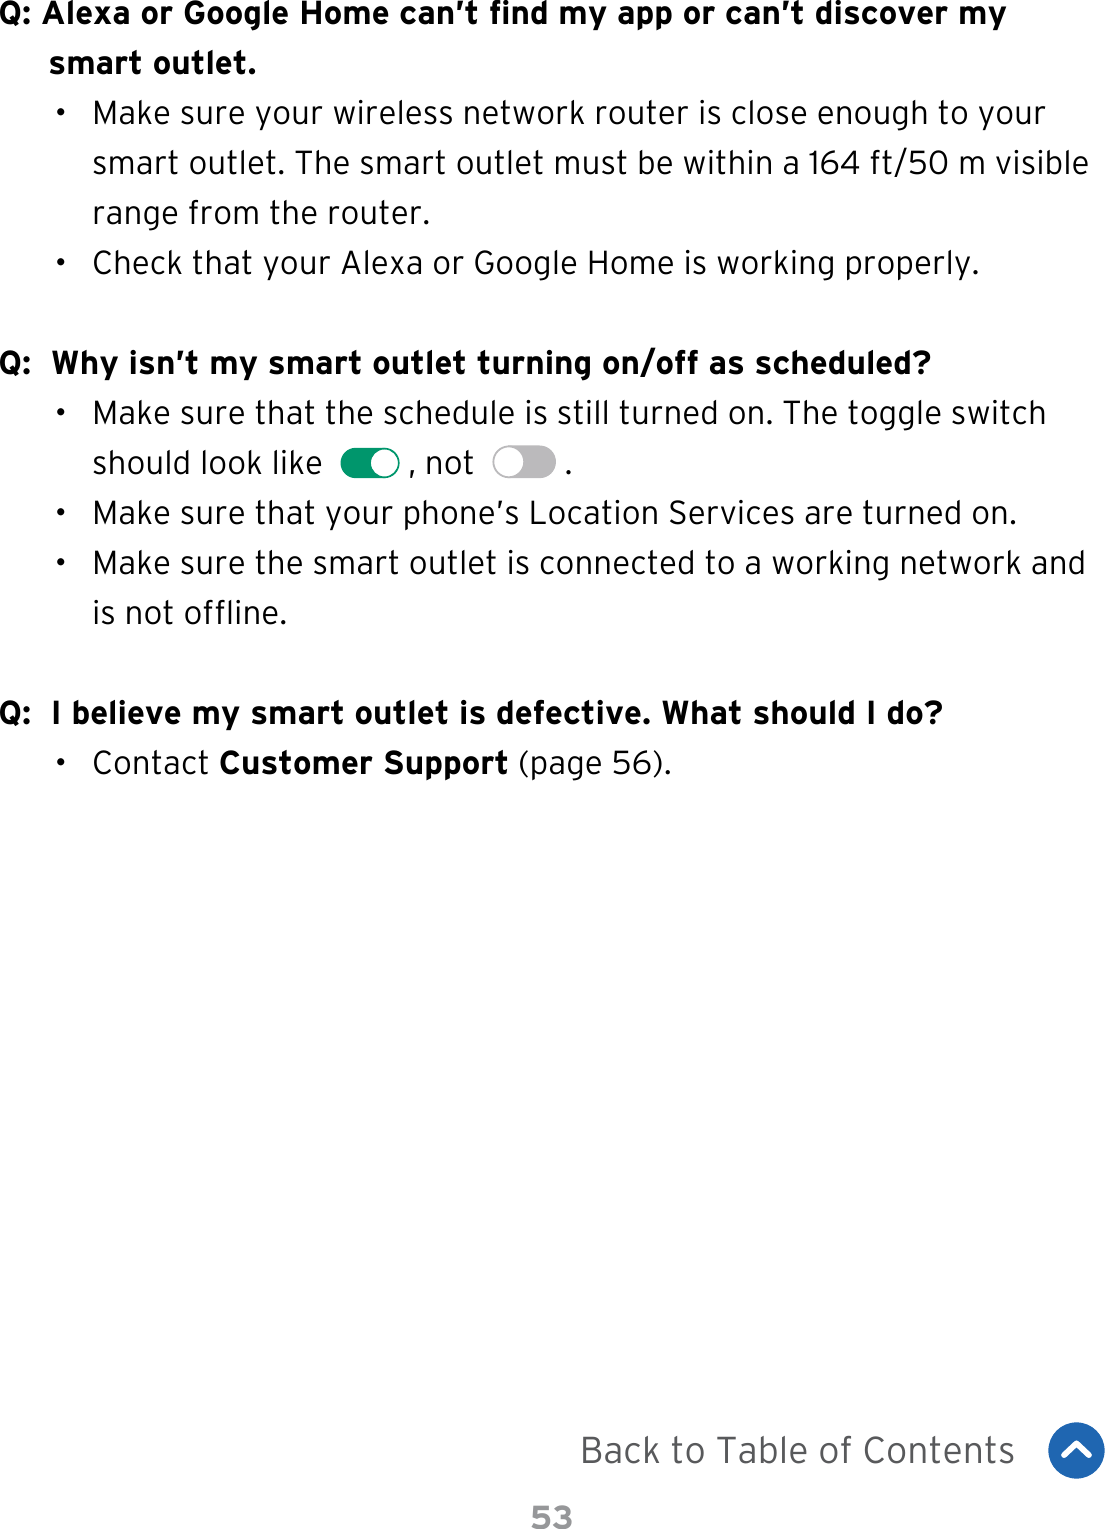 53Q: Alexa or Google Home can’t nd my app or can’t discover my smart outlet.•  Make sure your wireless network router is close enough to your smart outlet. The smart outlet must be within a 164 ft/50 m visible range from the router.•  Check that your Alexa or Google Home is working properly.Q:  Why isn’t my smart outlet turning on/off as scheduled?•  Make sure that the schedule is still turned on. The toggle switch should look like    , not    .•  Make sure that your phone’s Location Services are turned on.•  Make sure the smart outlet is connected to a working network and is not ofine.Q:  I believe my smart outlet is defective. What should I do?•  Contact Customer Support (page 56).Back to Table of Contents